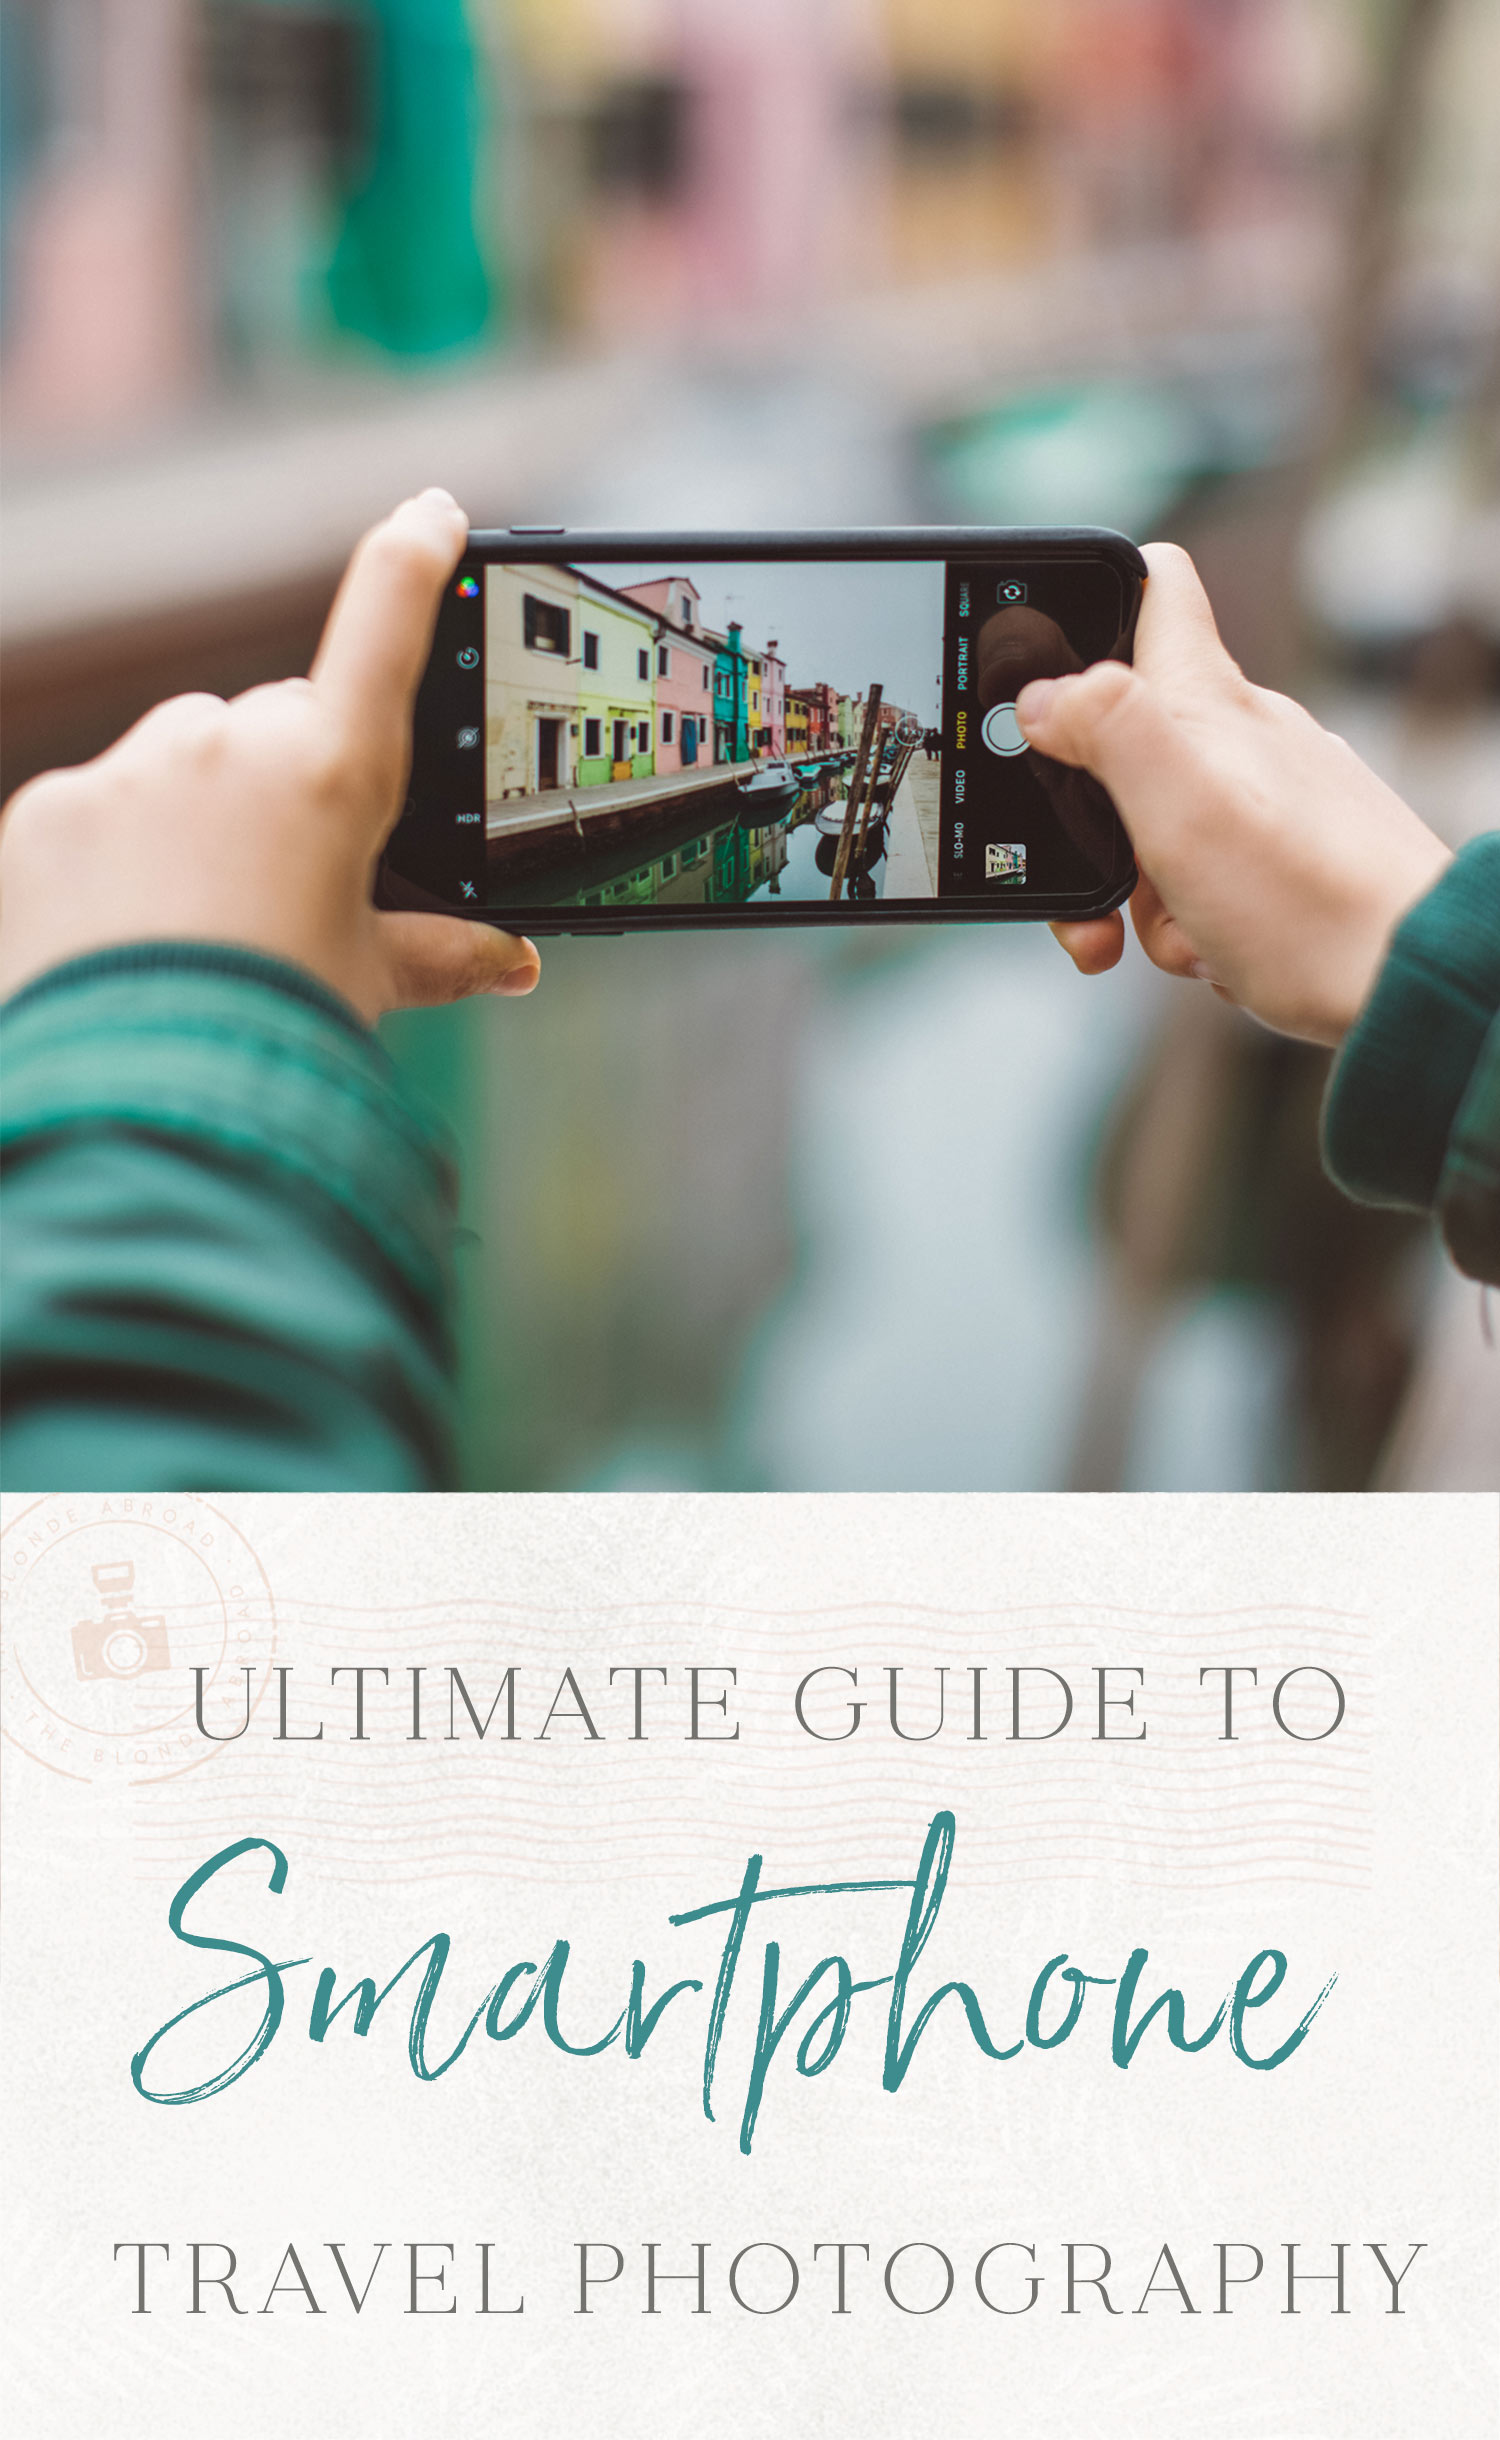 ultimate guide to smartphone travel photography